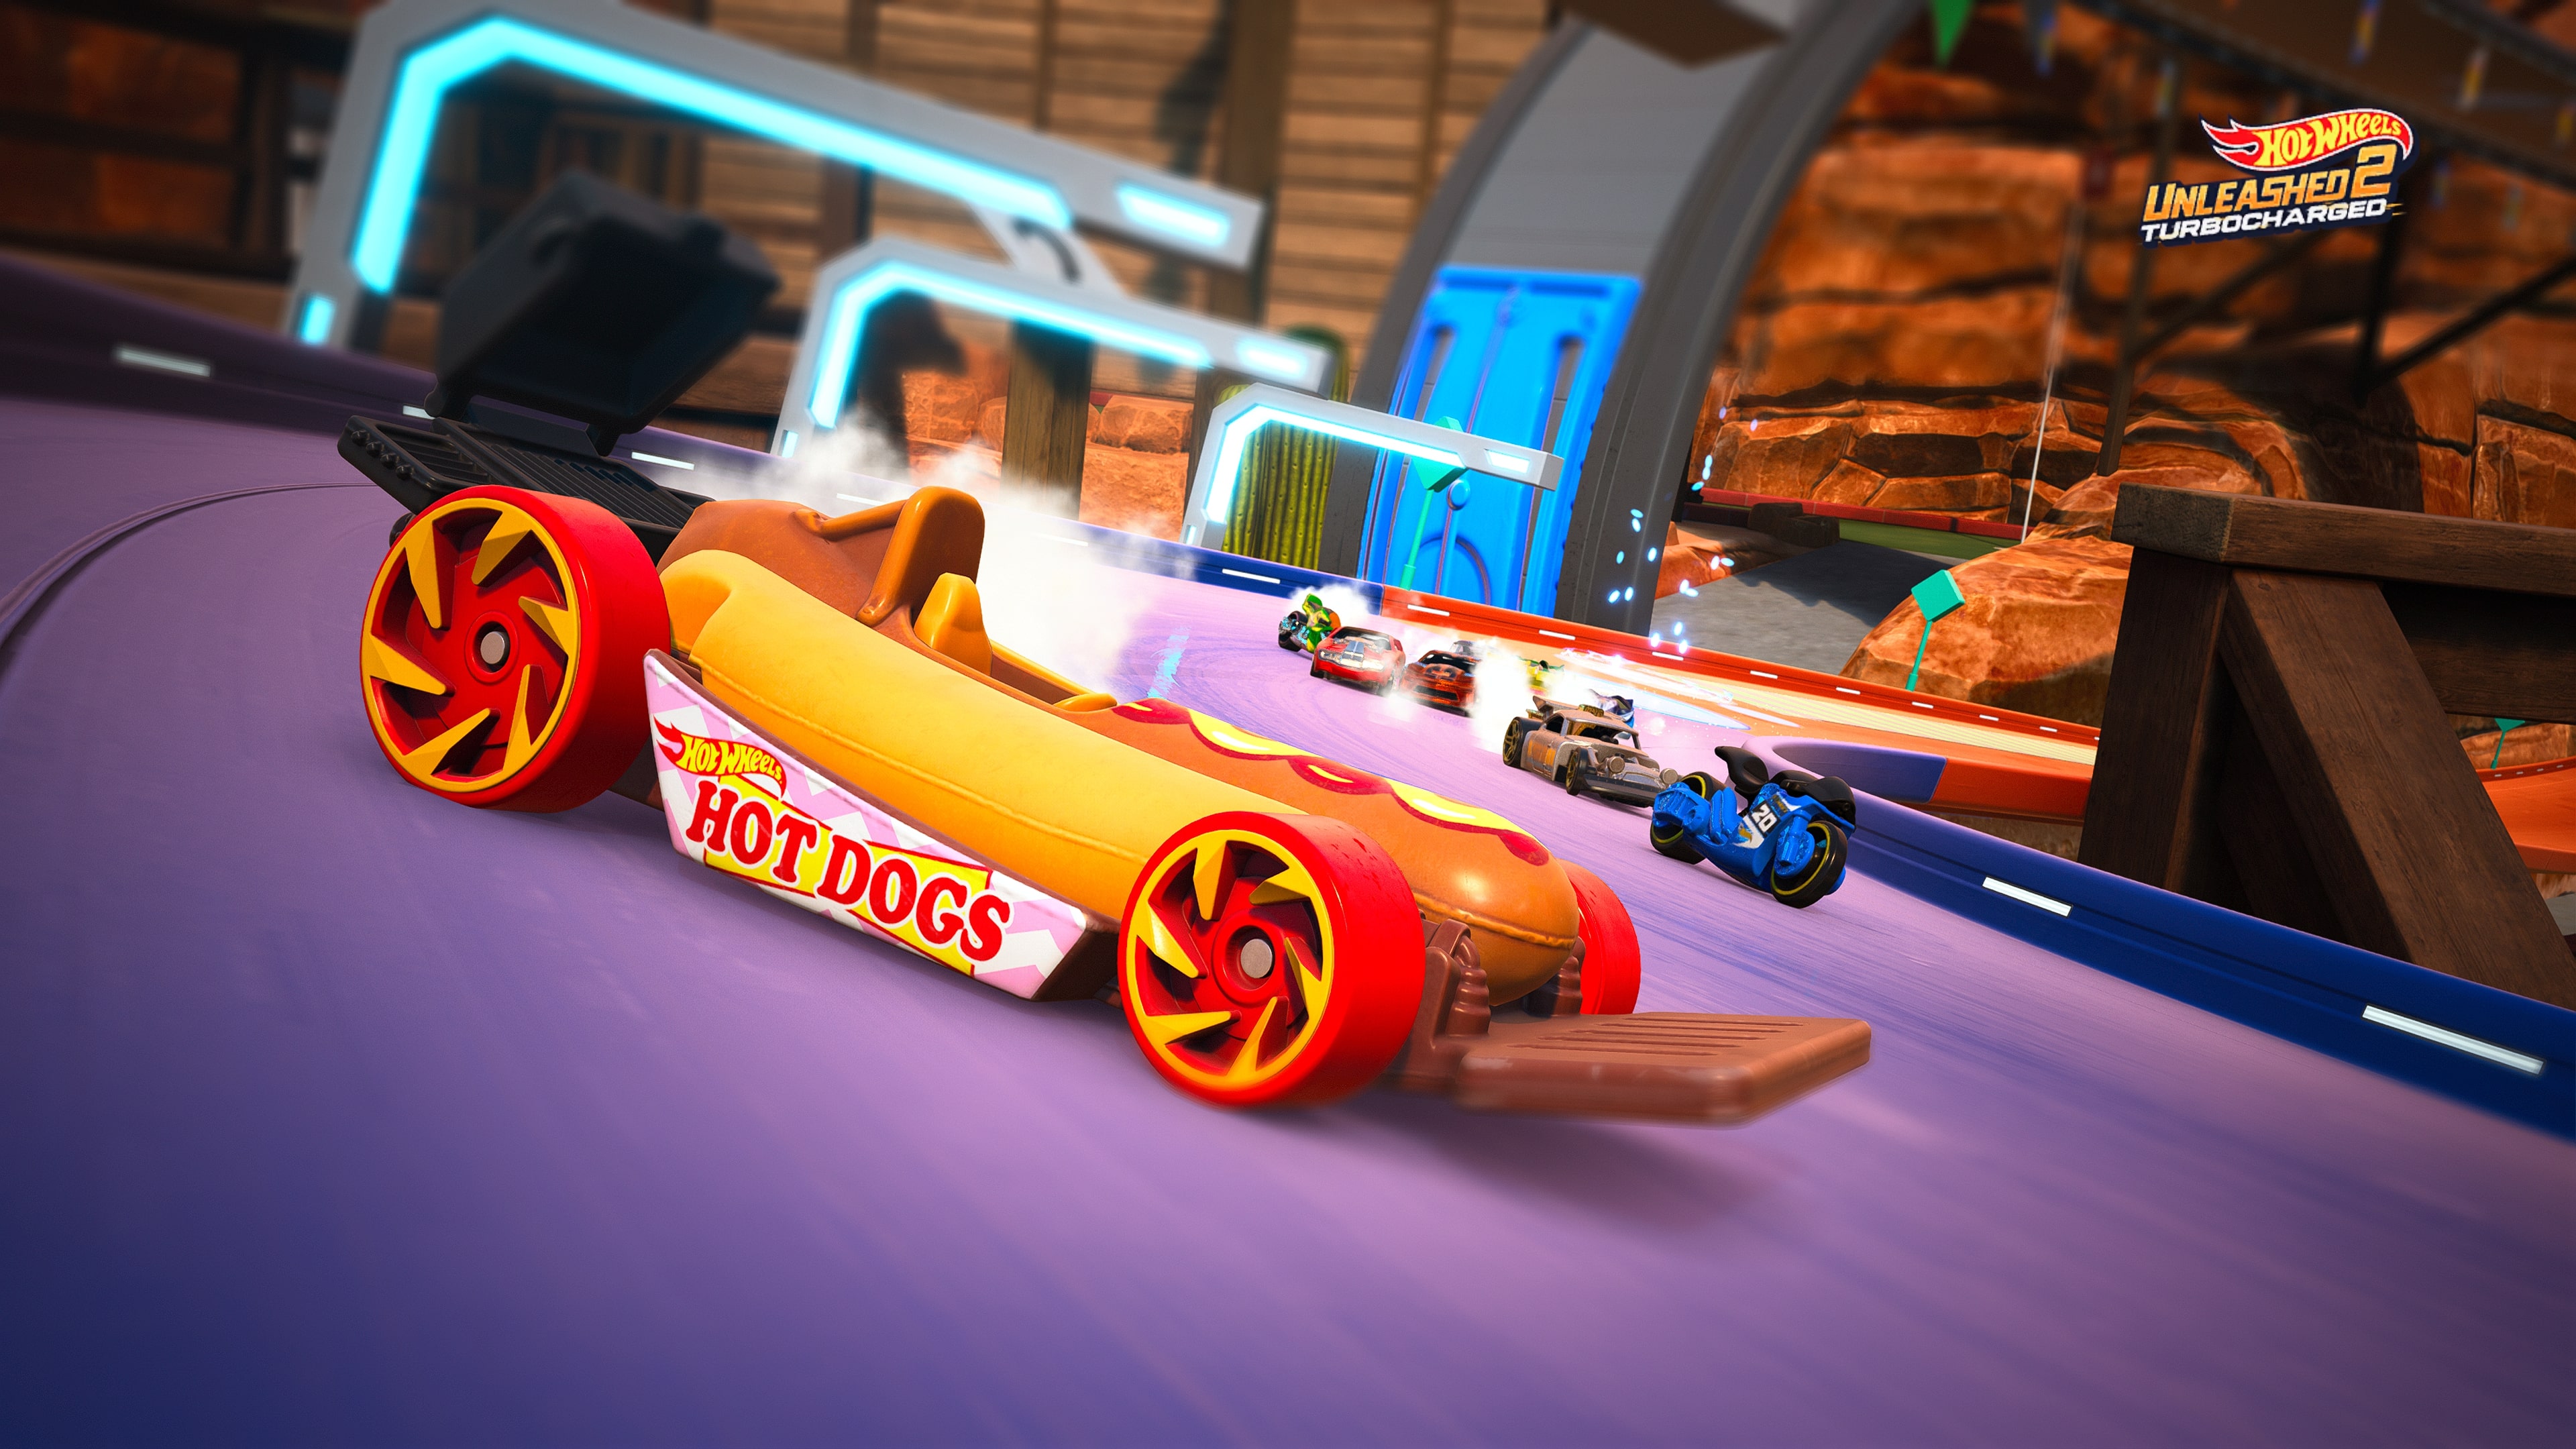 HOT WHEELS UNLEASHED™ 2 - Turbocharged - Legendary Edition for Nintendo  Switch - Nintendo Official Site